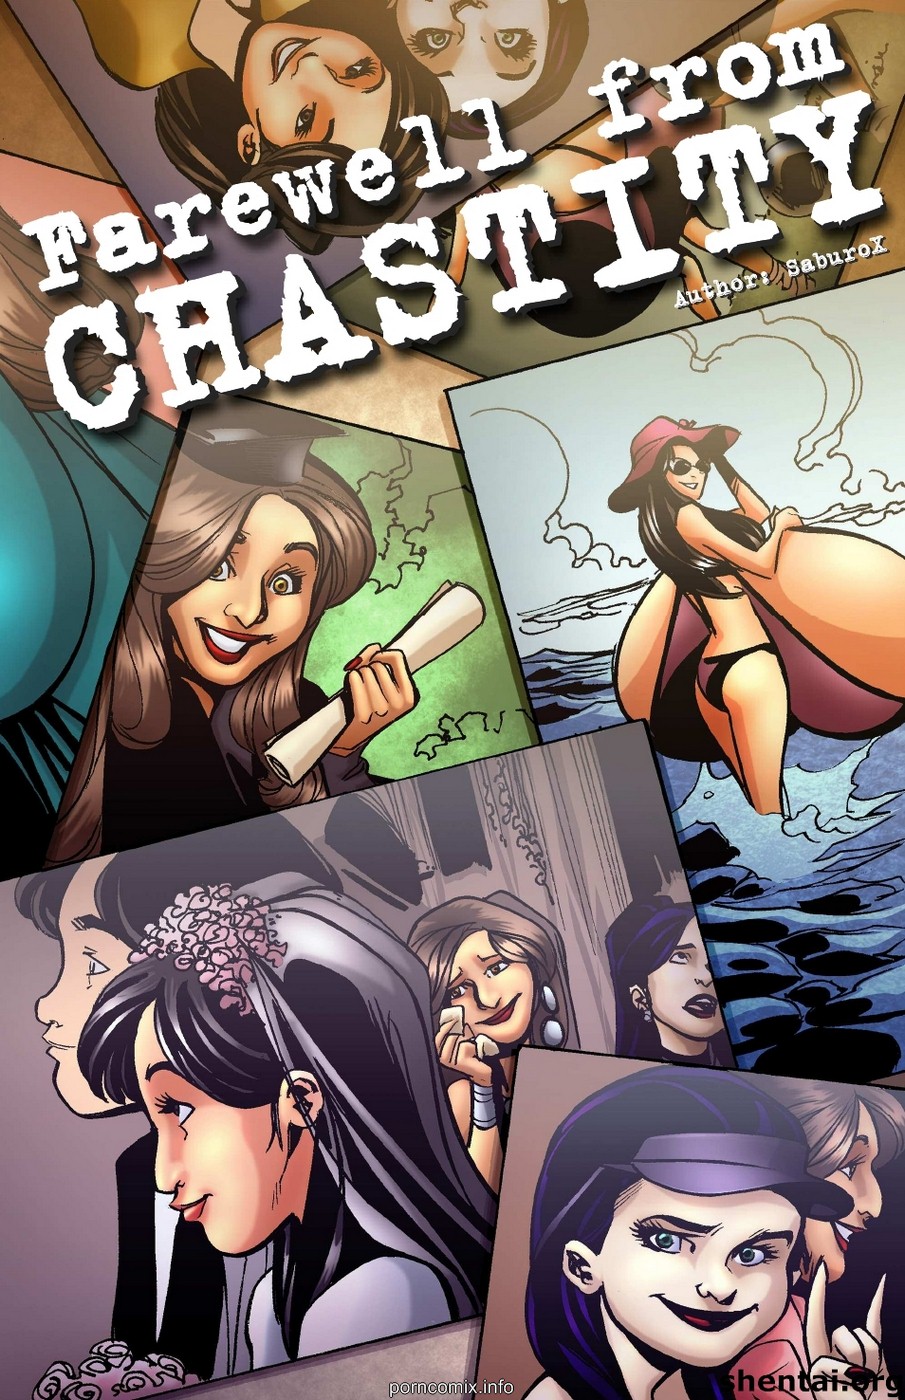 Porn Comics - Farewell from Chastity porn comics 8 muses